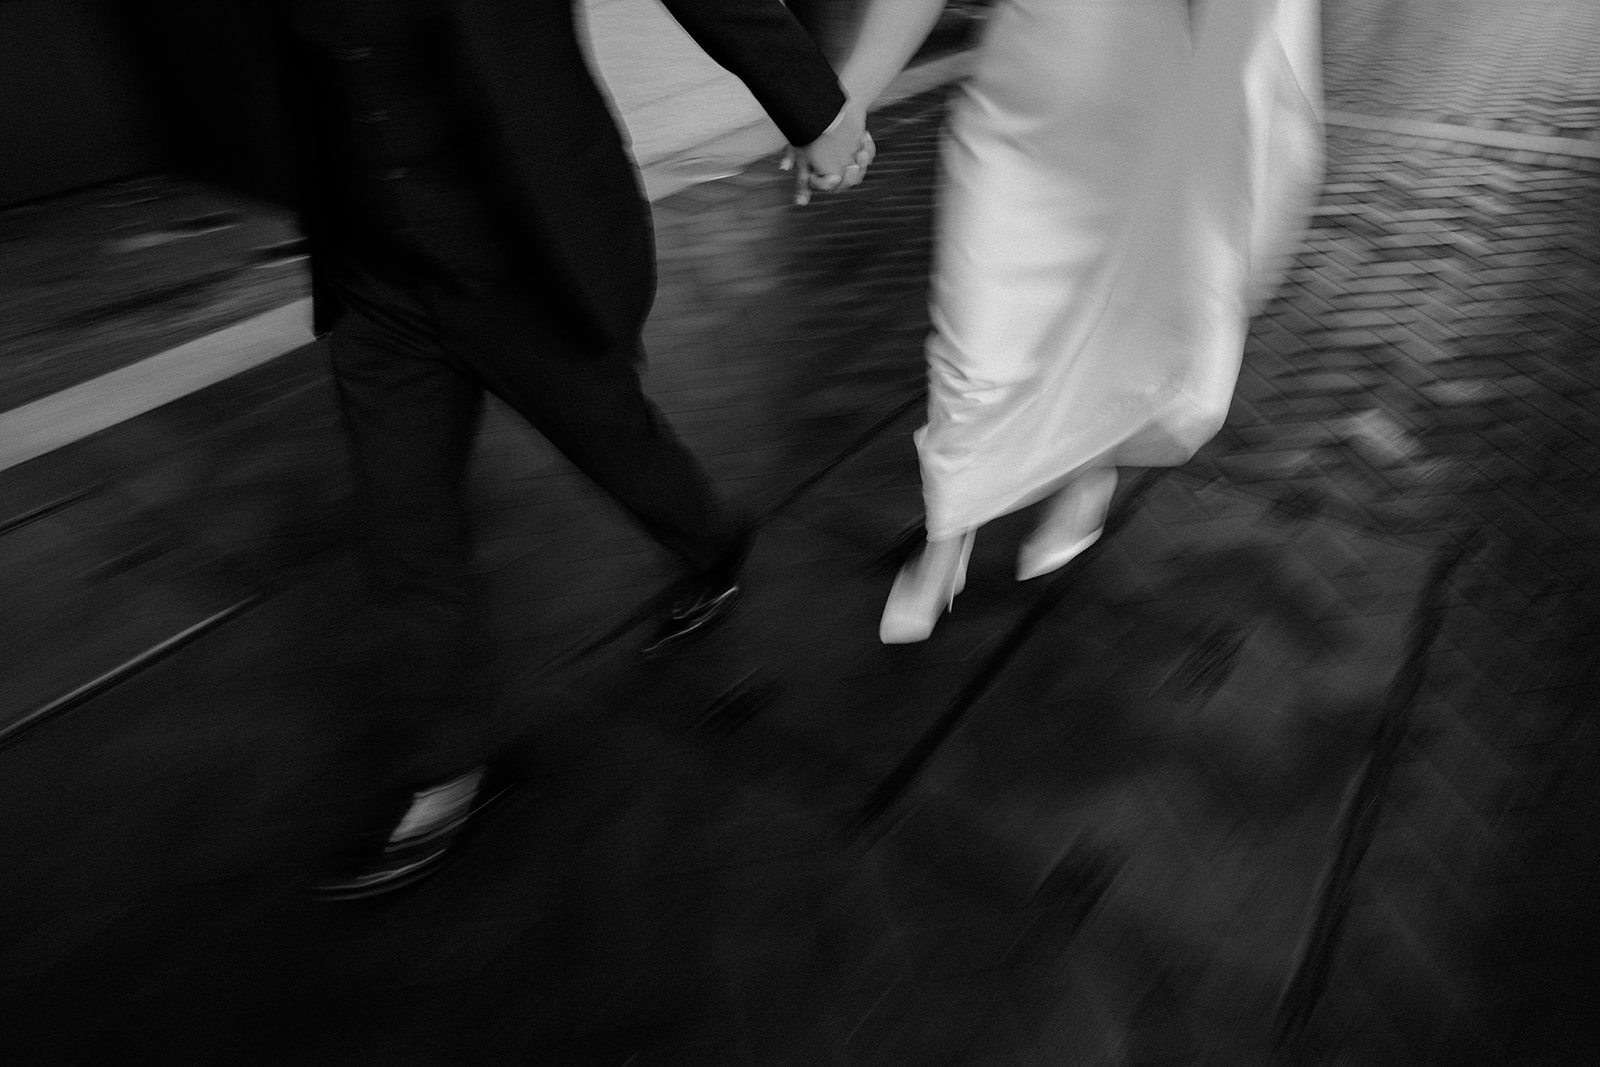 Are you blur photo of the bride and groom running through the city?